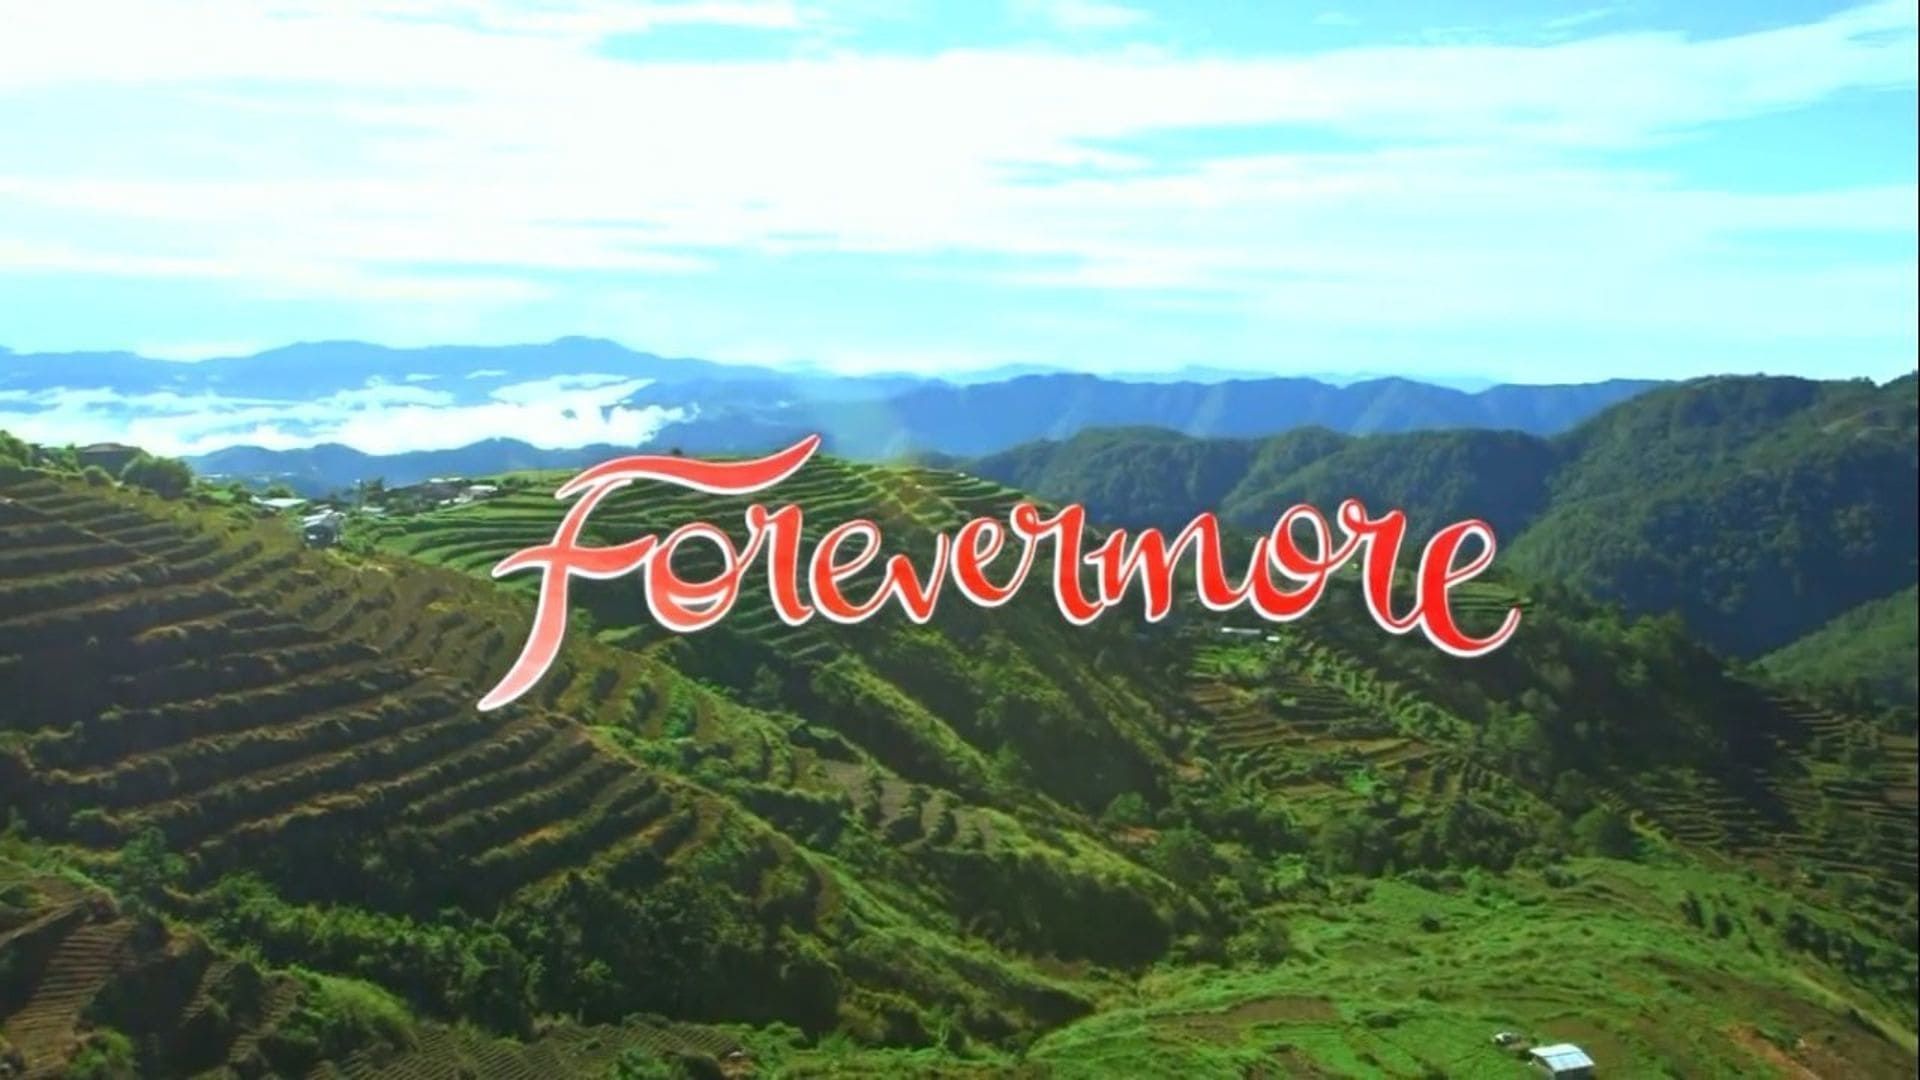 Forevermore background